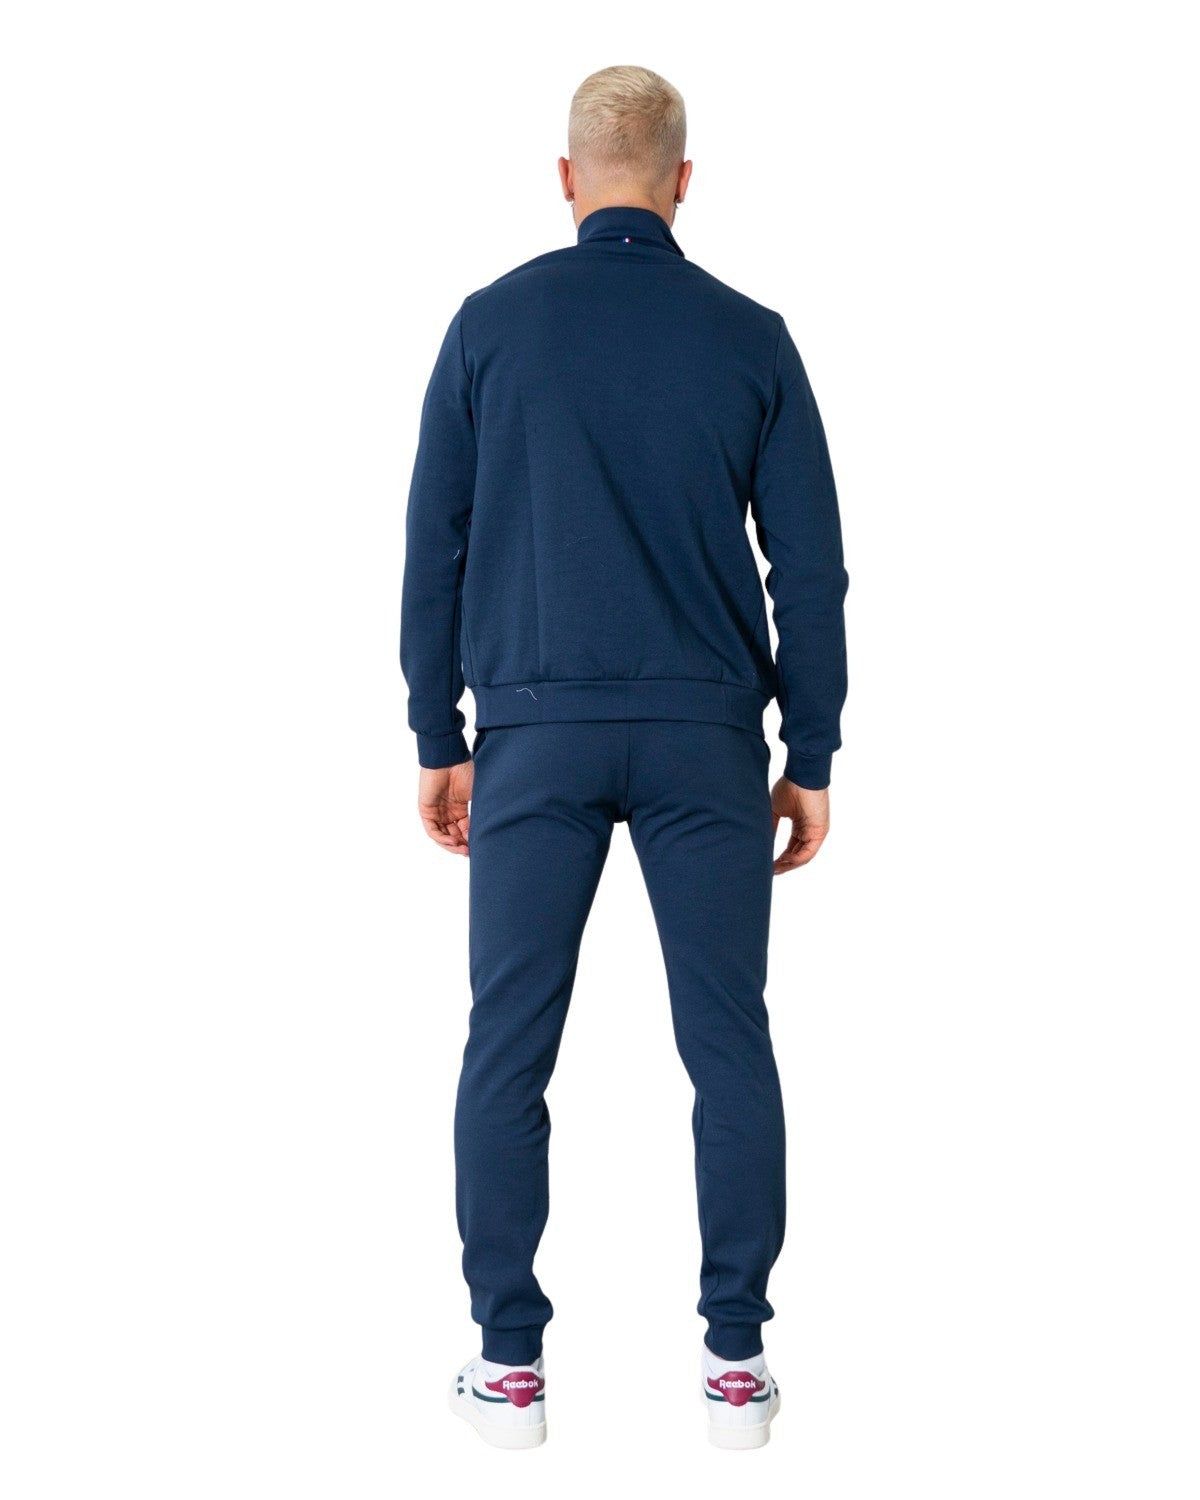 Brand: Le Coq Sportif Gender: Men Type: Sweatshirts Season: Fall/Winter  PRODUCT DETAIL • Color: blue • Pattern: print • Fastening: with zip • Sleeves: long  COMPOSITION AND MATERIAL • Composition: -15% cotton -85% polyester  •  Washing: machine wash at 30° -15% Cotton -85% Polyester